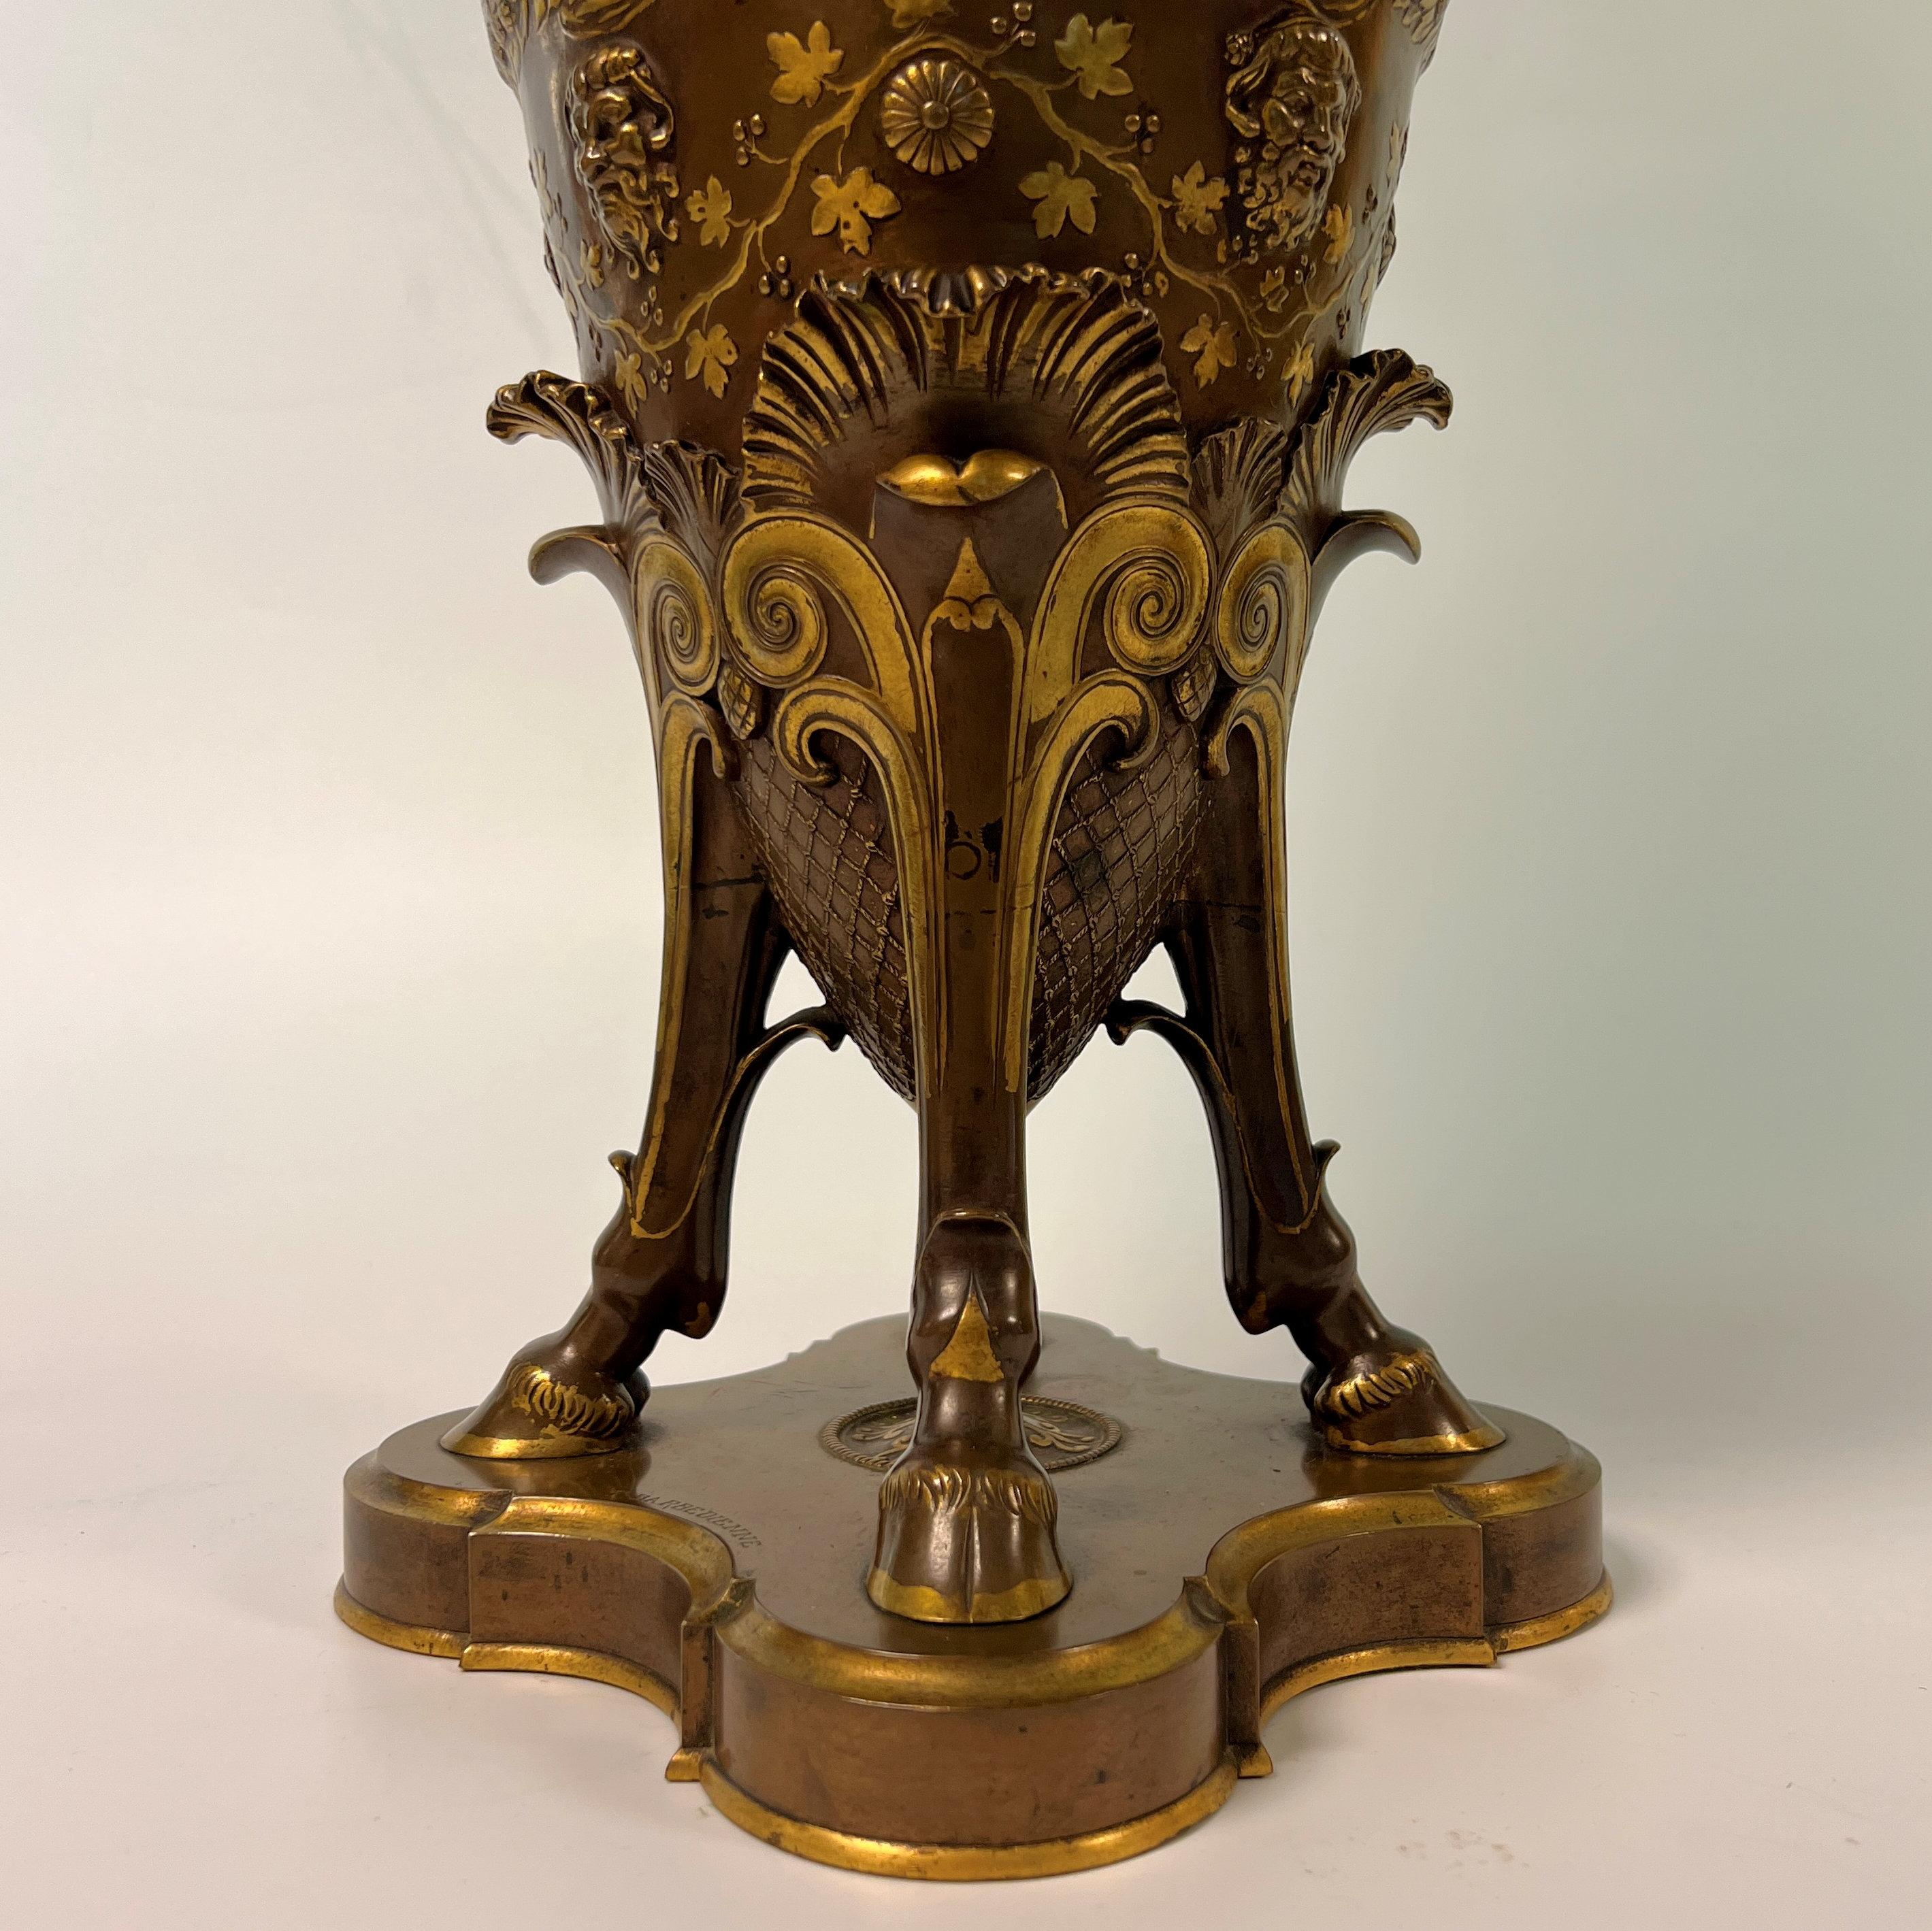 Barbedienne Bacchanalian Neoclassical Bronze Vase Mounted as Lamp For Sale 11